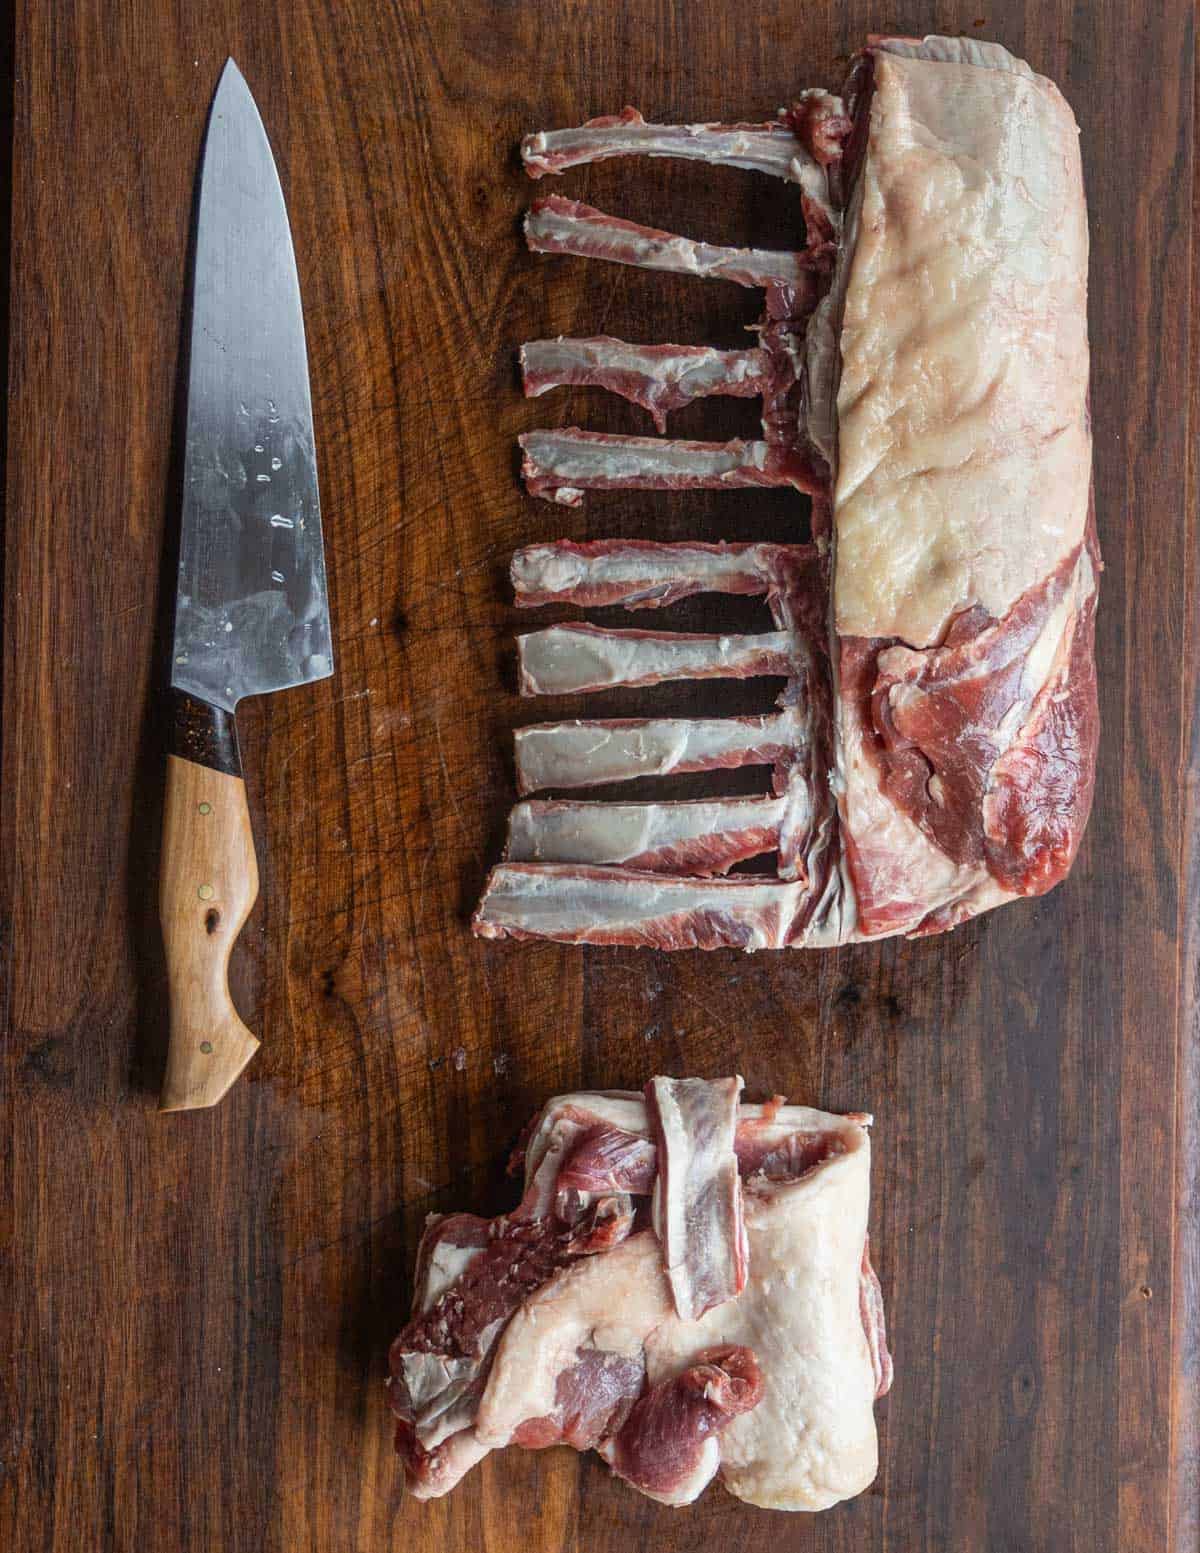 A rack of lamb trimmed and frenched showing a pile of trim and a cleaned rack of lamb next to a knife on a cutting board. 